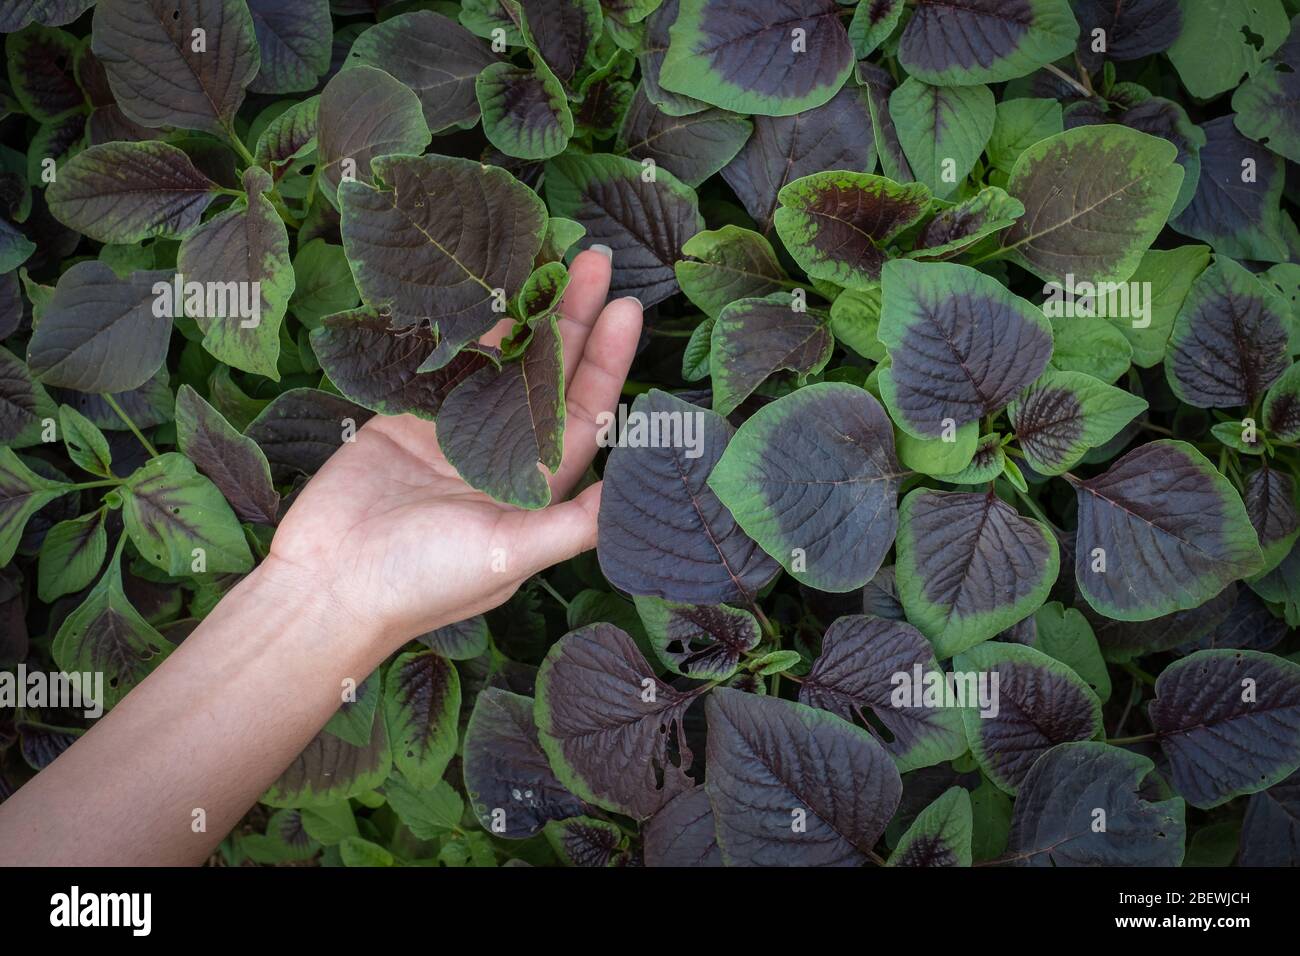 Woman hand holding spinach or red amaranth vegetables in gardens, The scientific name : Amaranthus tricolor Stock Photo